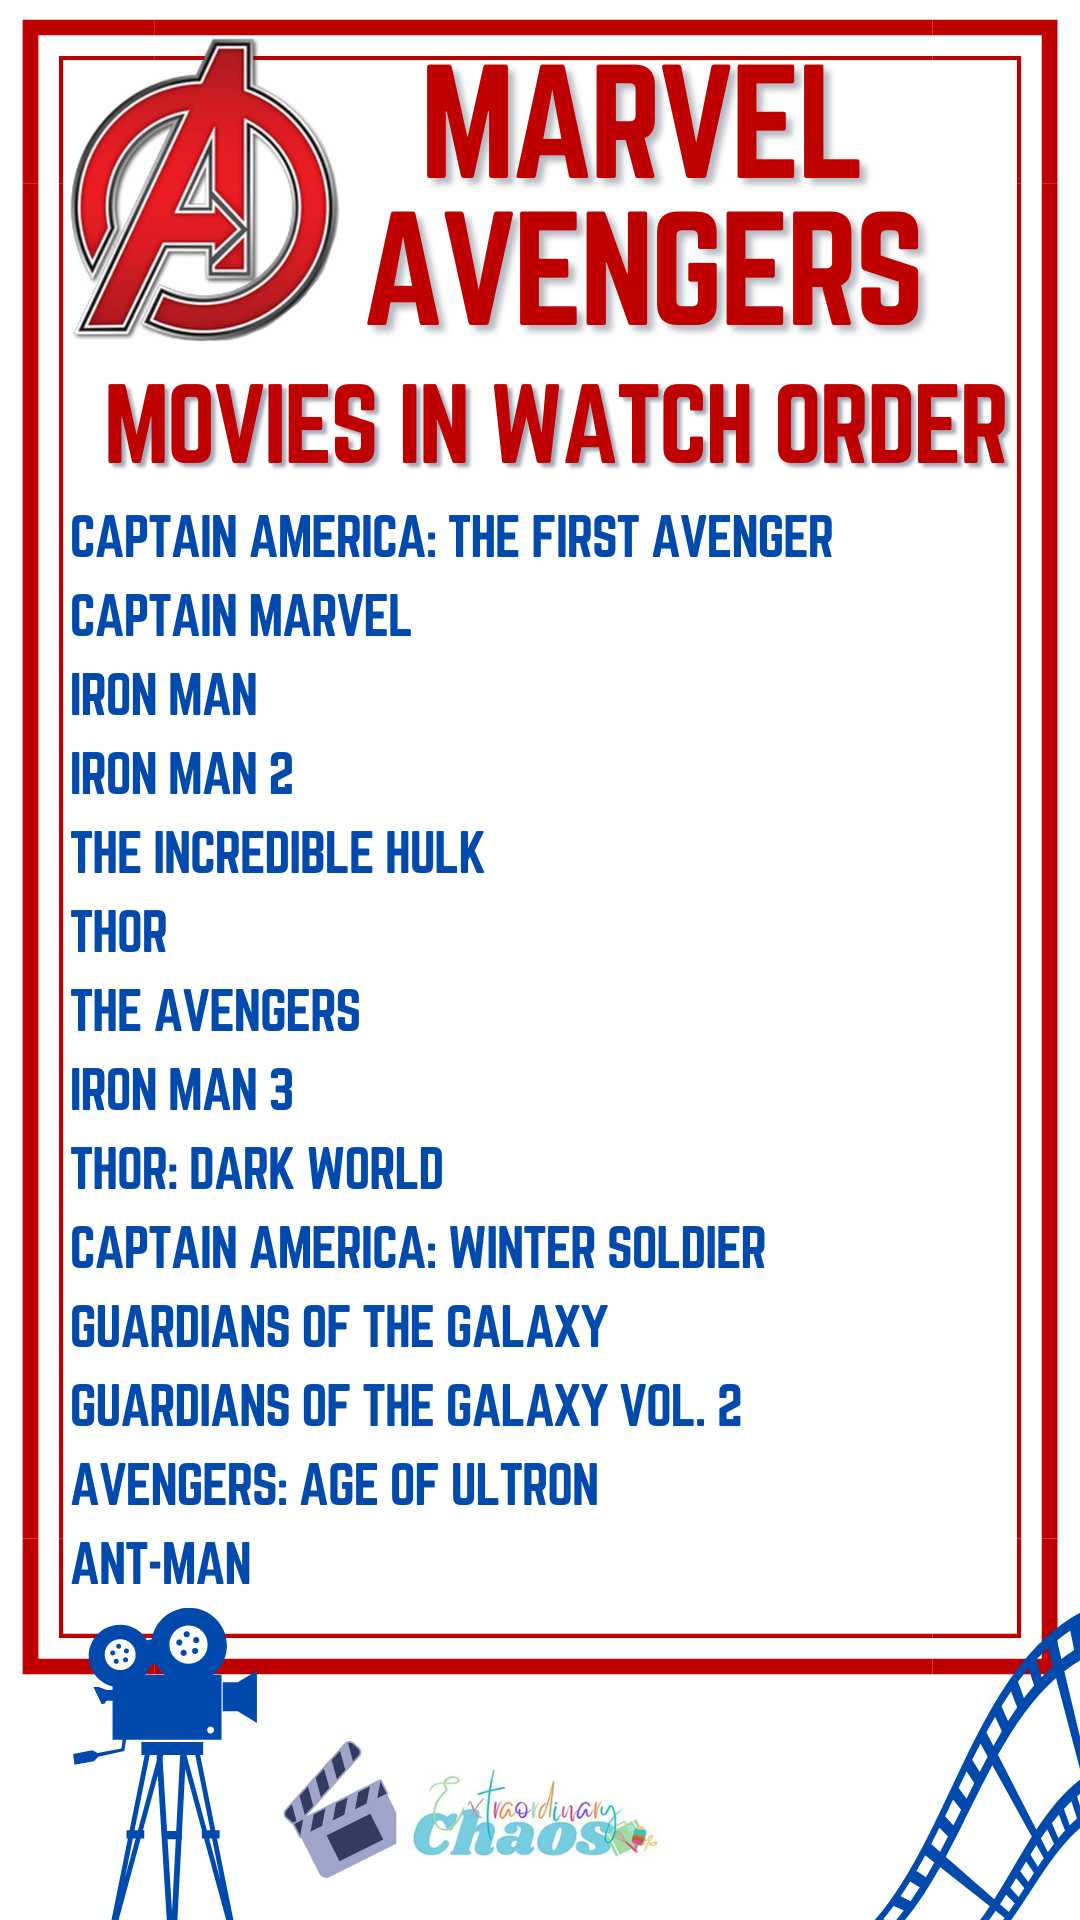 Avengers Movies in Order Page One